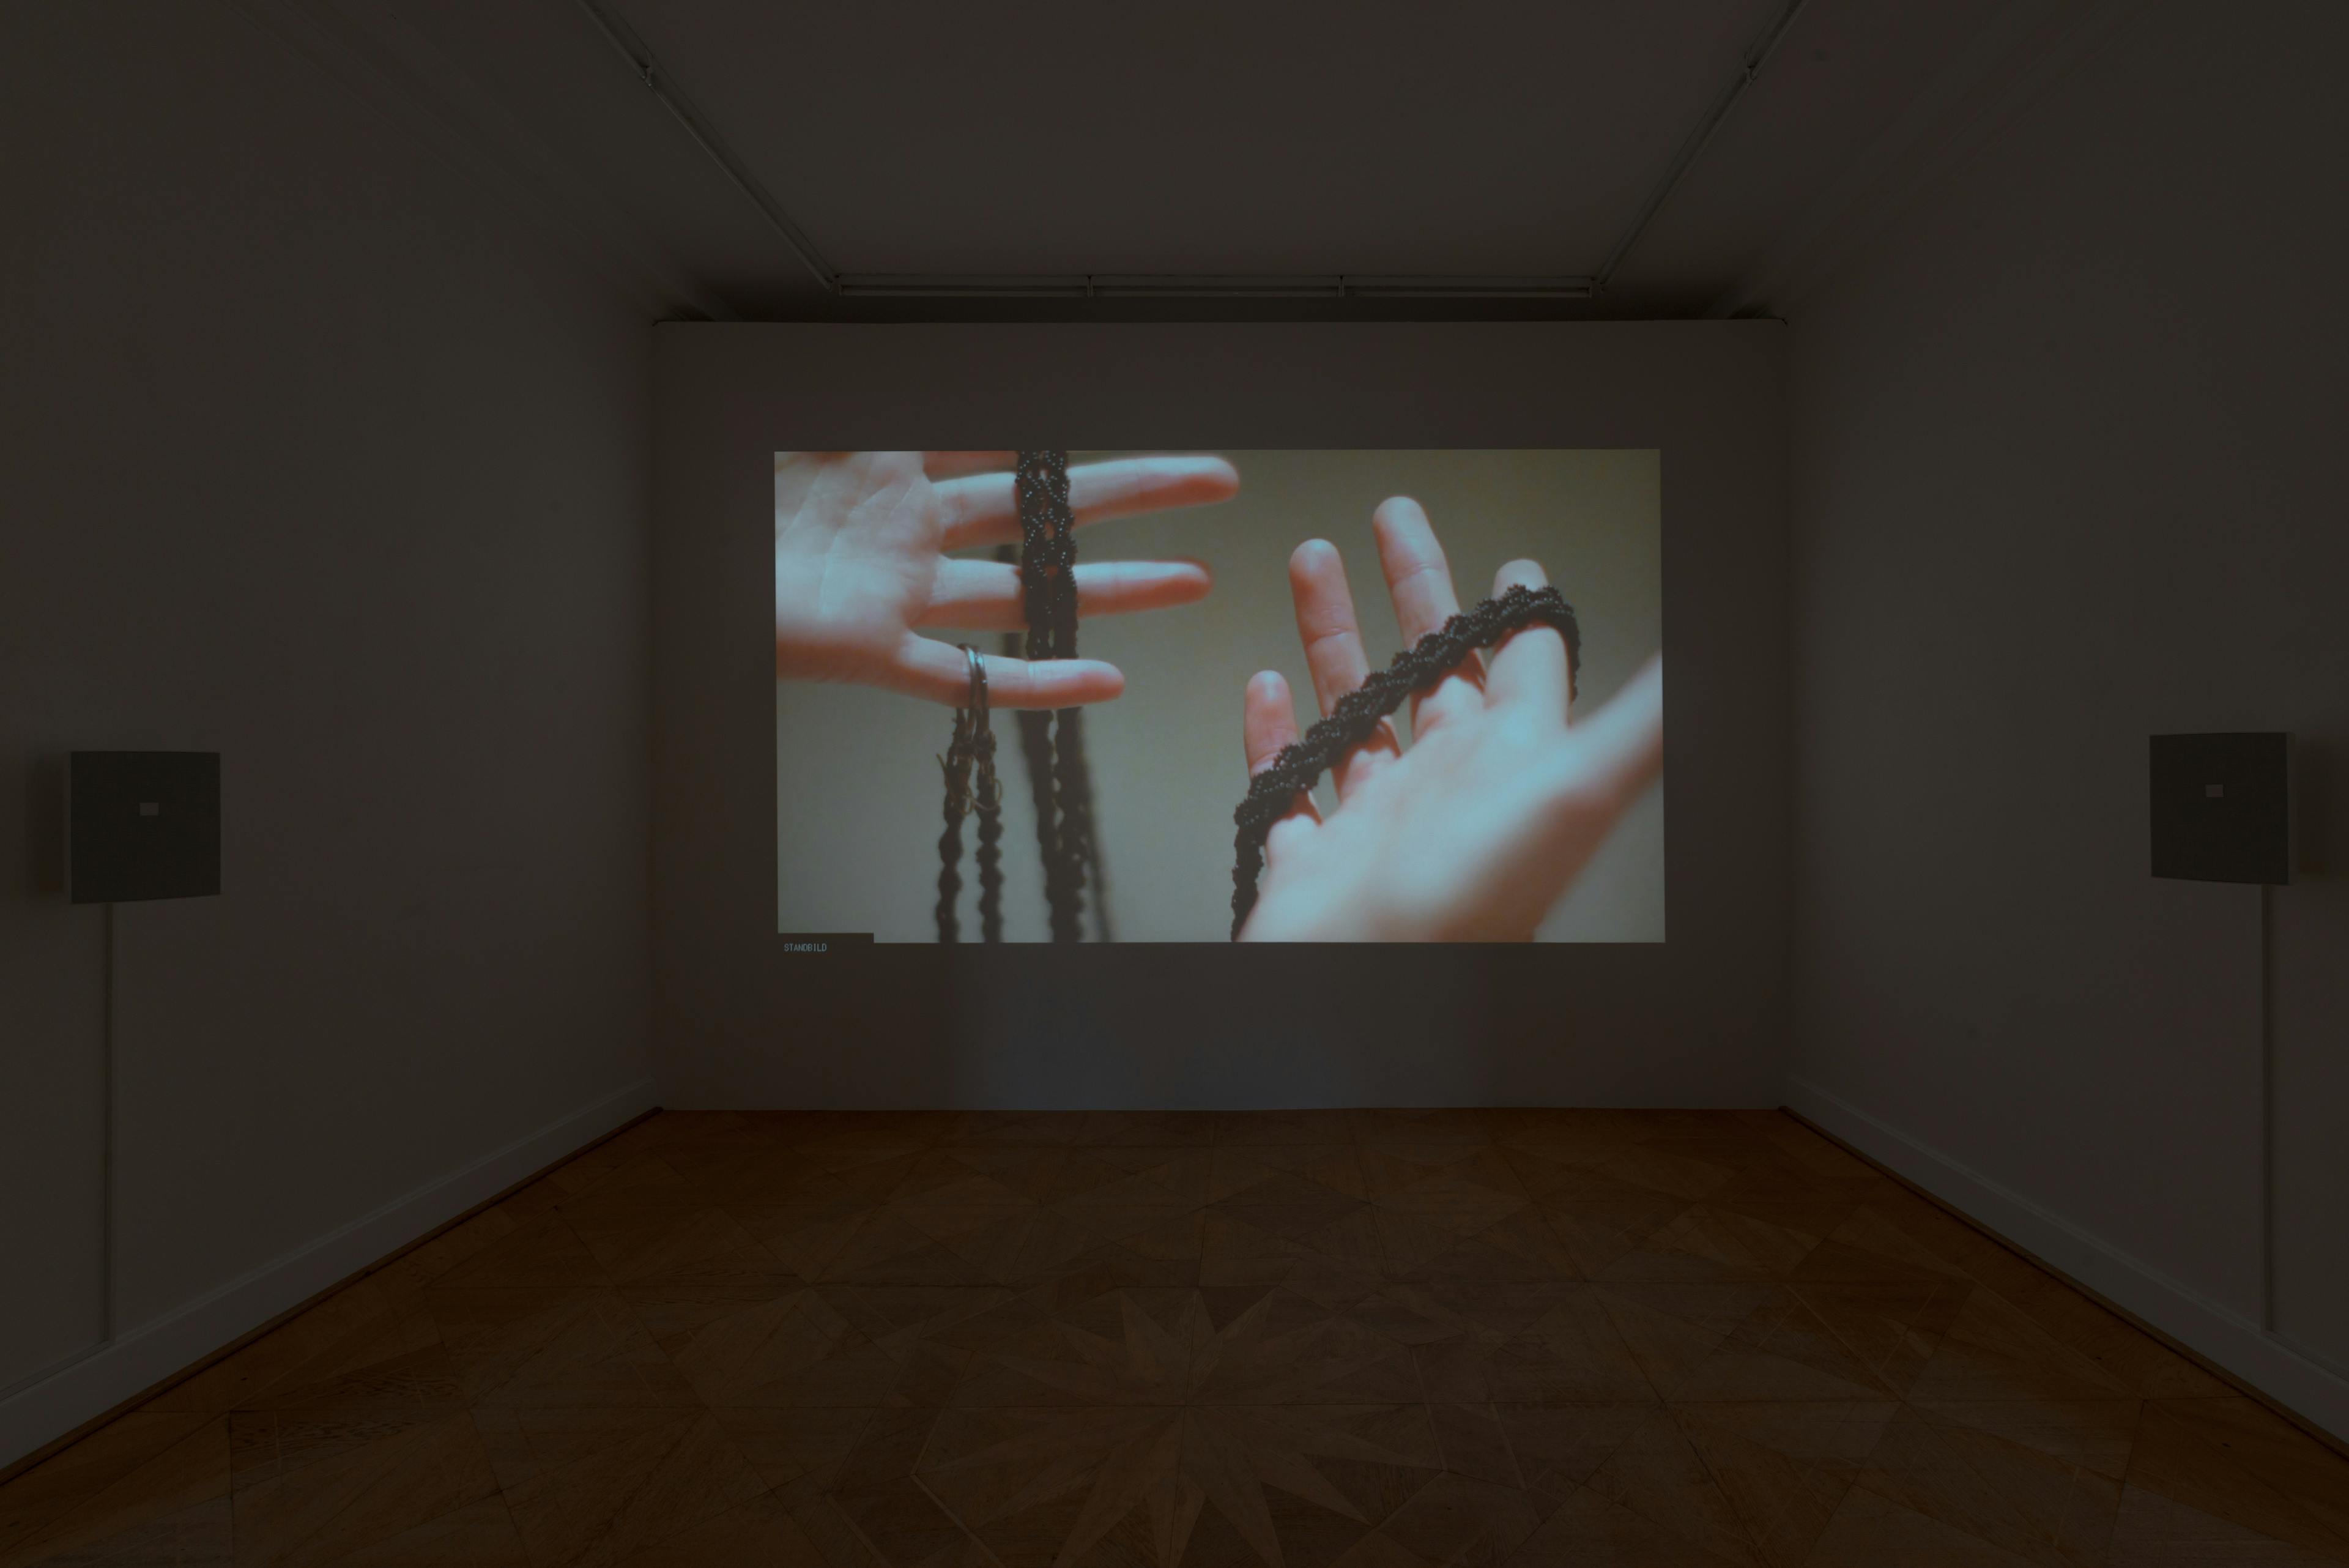 In a darkened gallery space, a single-channel video work is projected on a white wall at the end of the room. The video shows a pair of hands holding a beaded rope.